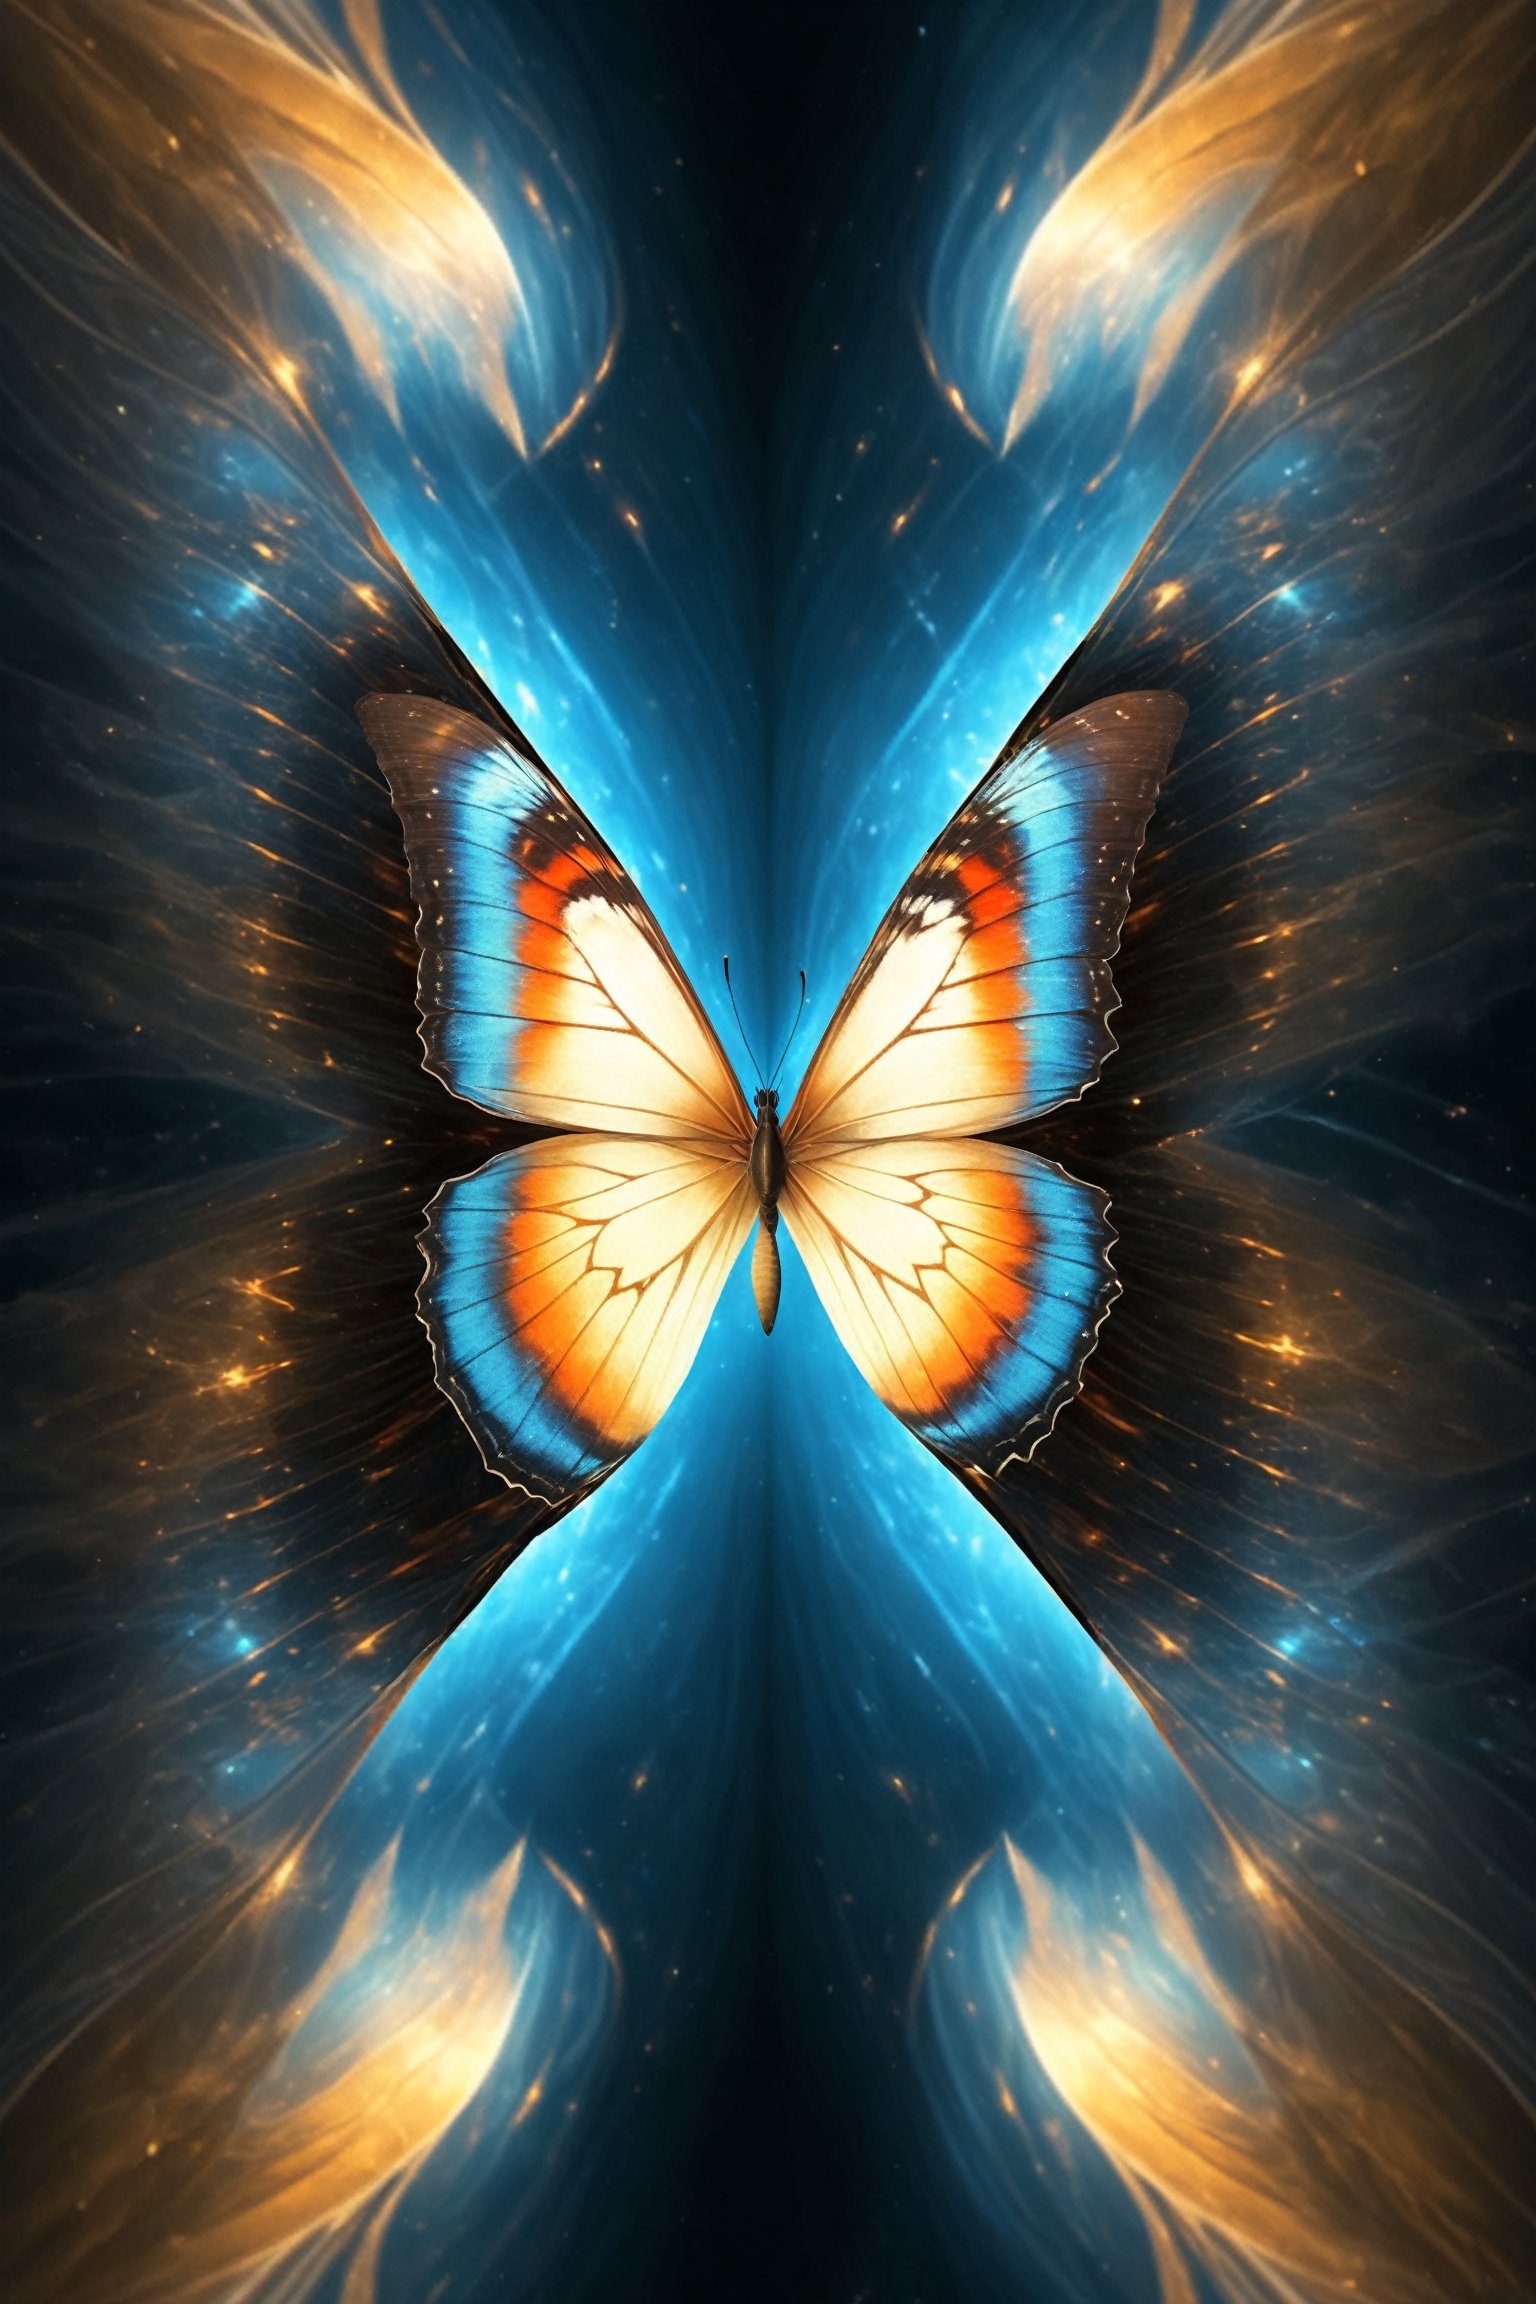 Masterpiece),  An image of a butterfly with wings formed by two human faces looking at each other and facing each other,  one light and the other dark,  representing the duality of the Gemini,  the image quality is 8k,  The image has an optical illusion effect of two faces facing each other,  mimicking the wings of the butterfly,  creating a contrast between colors and shapes,  the effect also generates some lines and curves that simulate movement and energy,  transmitting beauty and passion